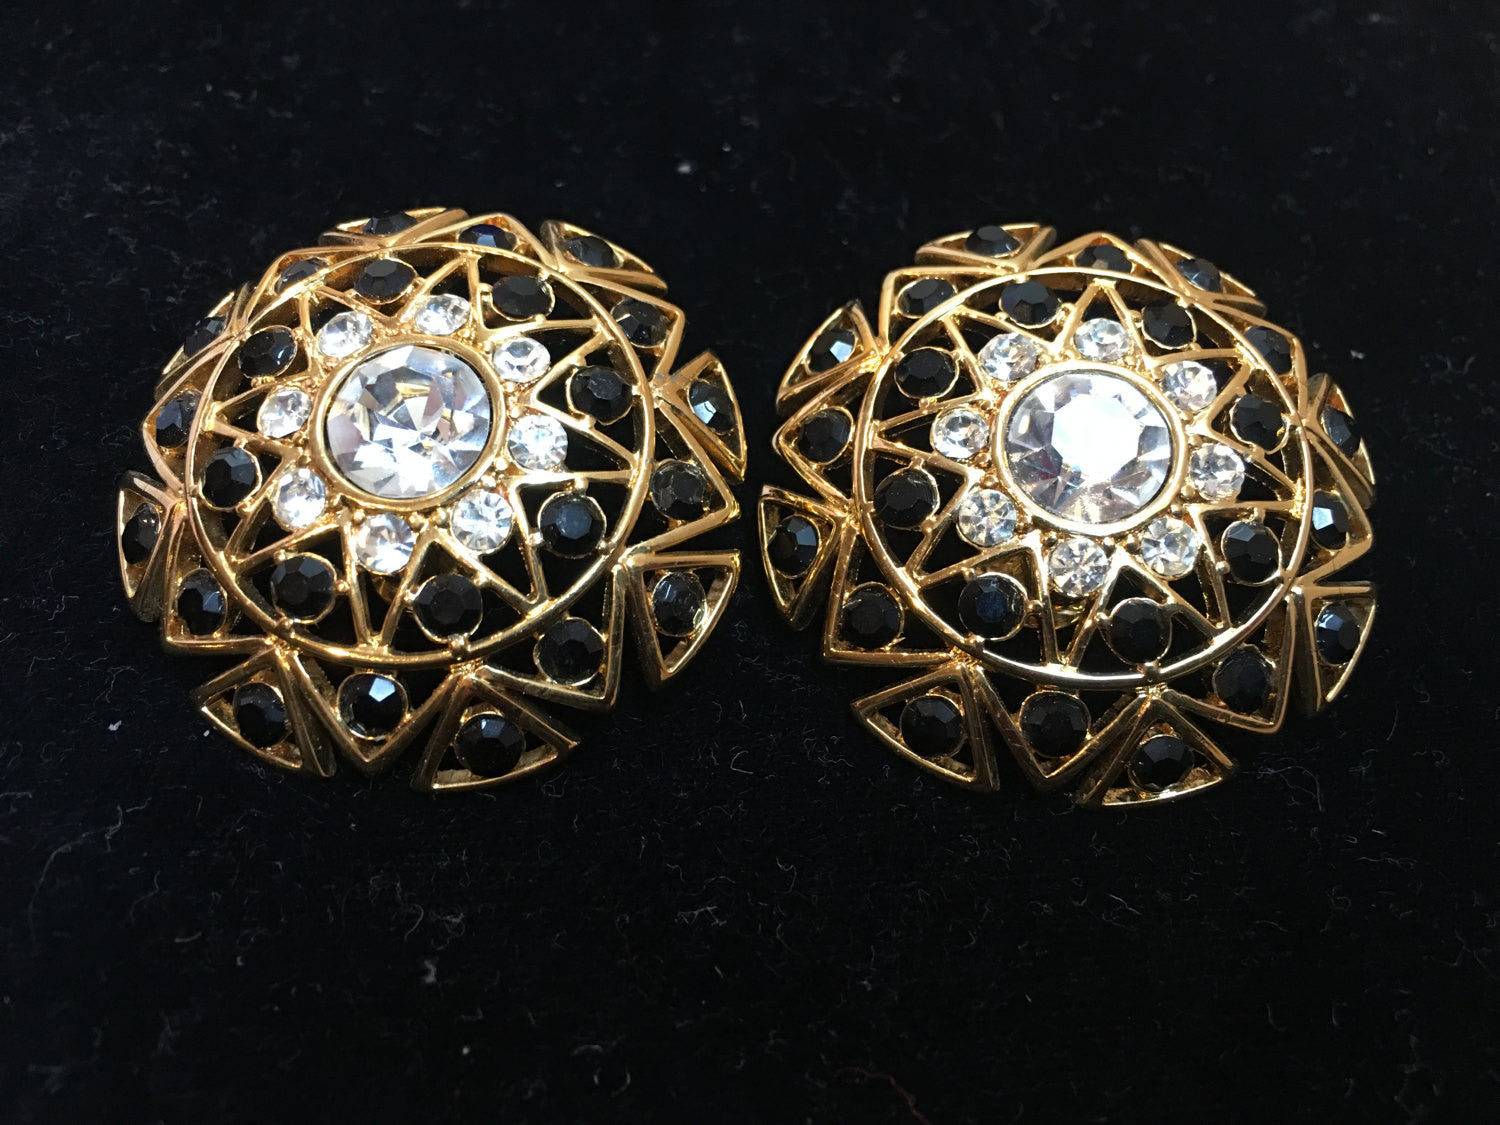 Monet Rhinestones Clip-On Earrings - Bold Vintage Jewelry Statement from the 1980s